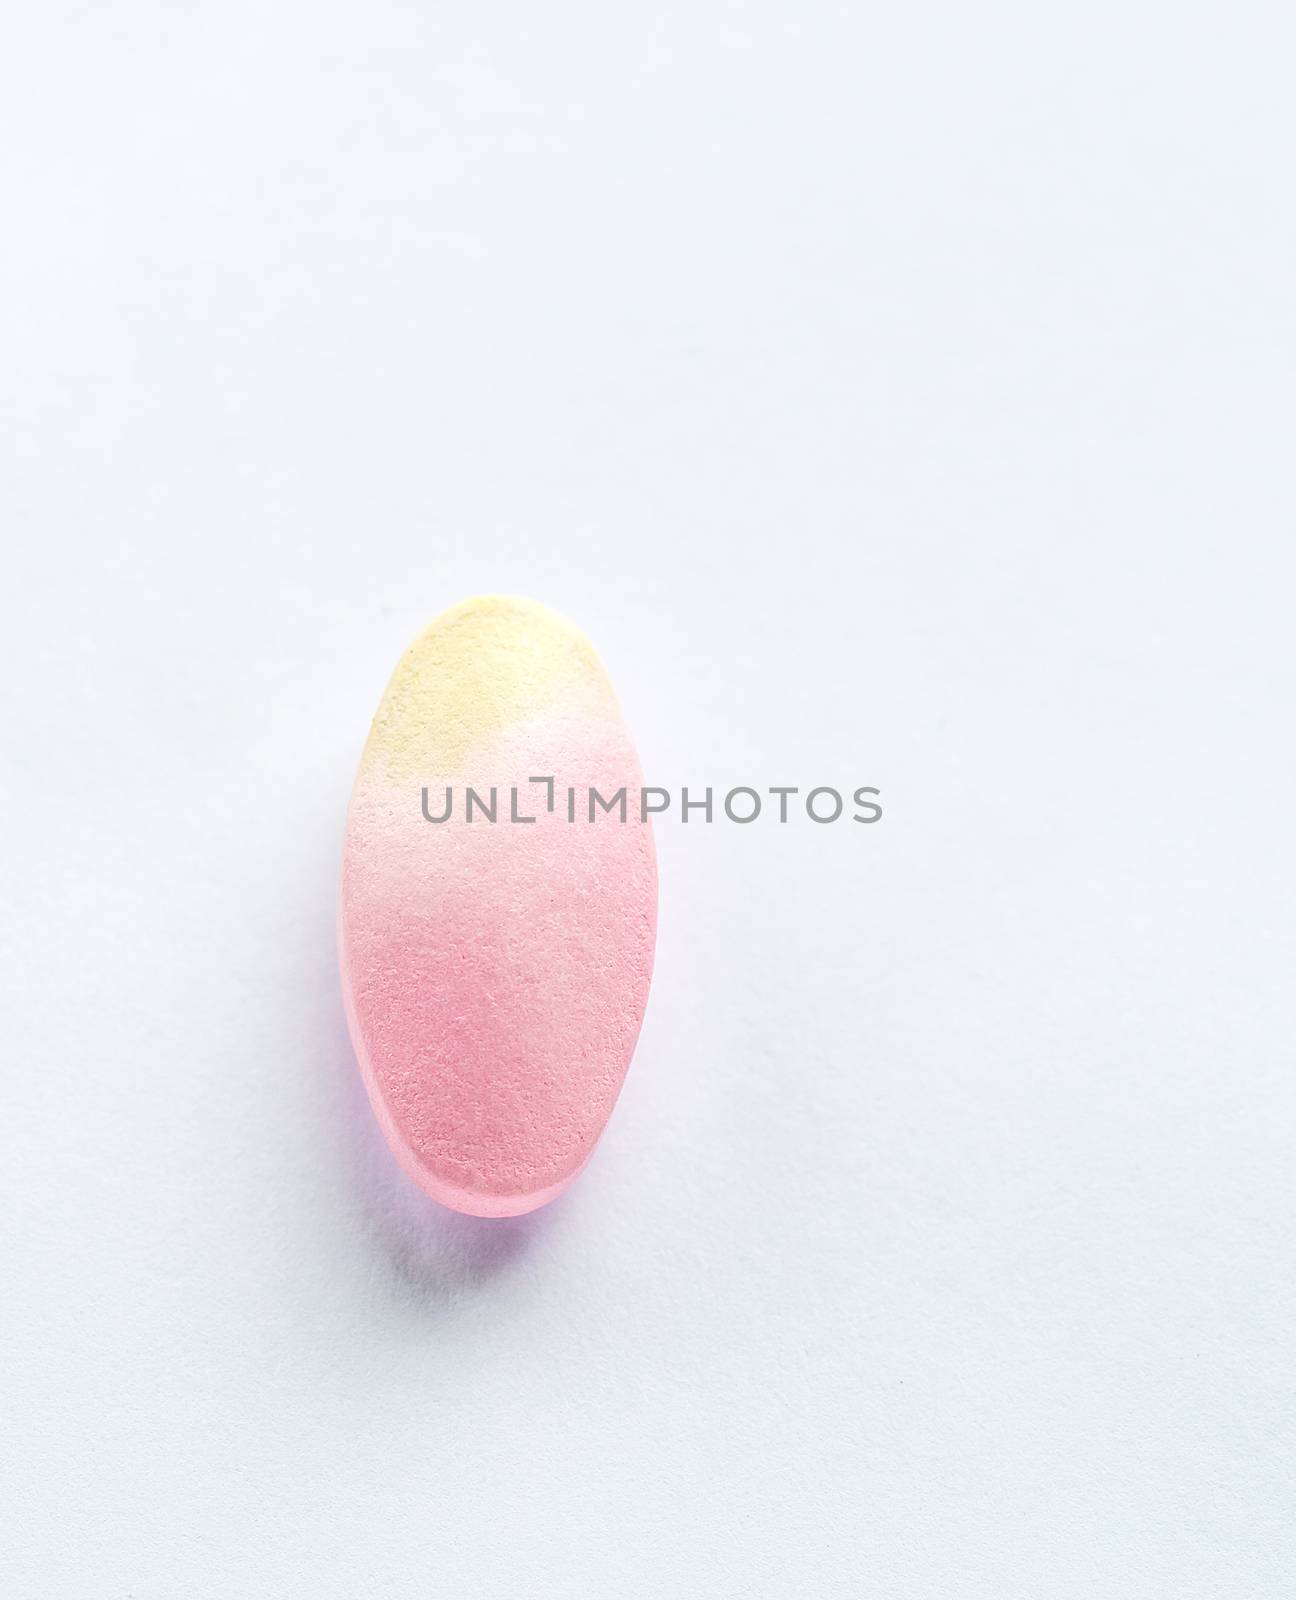 Expired calcium tablet pills with color change isolated on white background with copy space by Fahroni